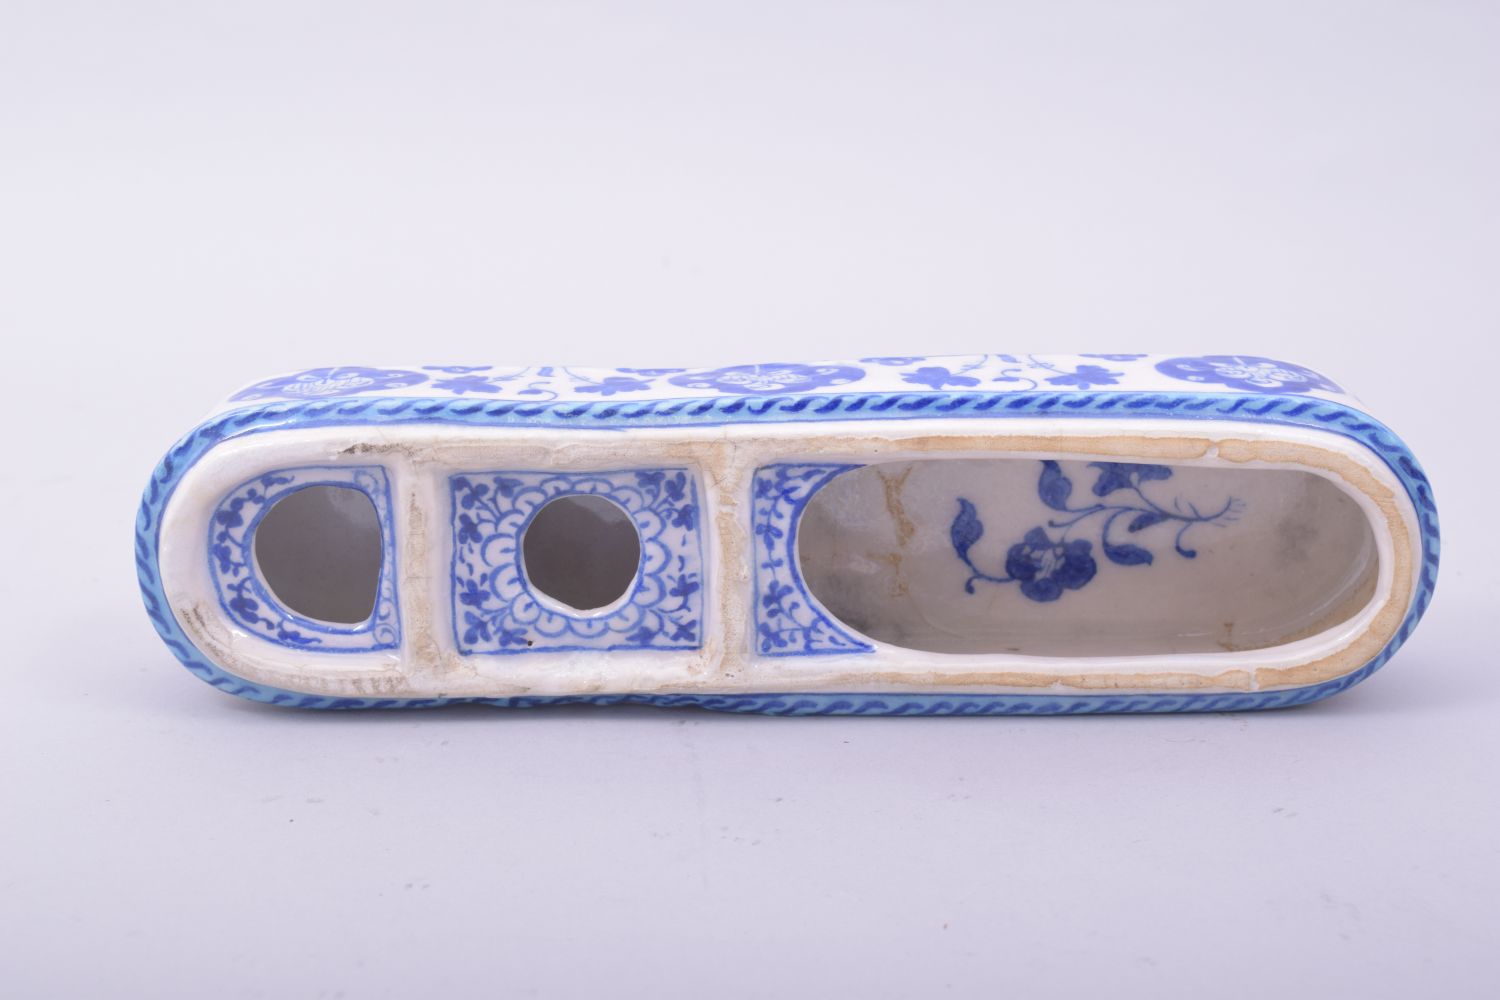 A TURKISH OTTOMAN BLUE AND WHITE GLAZED POTTERY LIDDED PEN BOX, the interior with three - Image 4 of 6